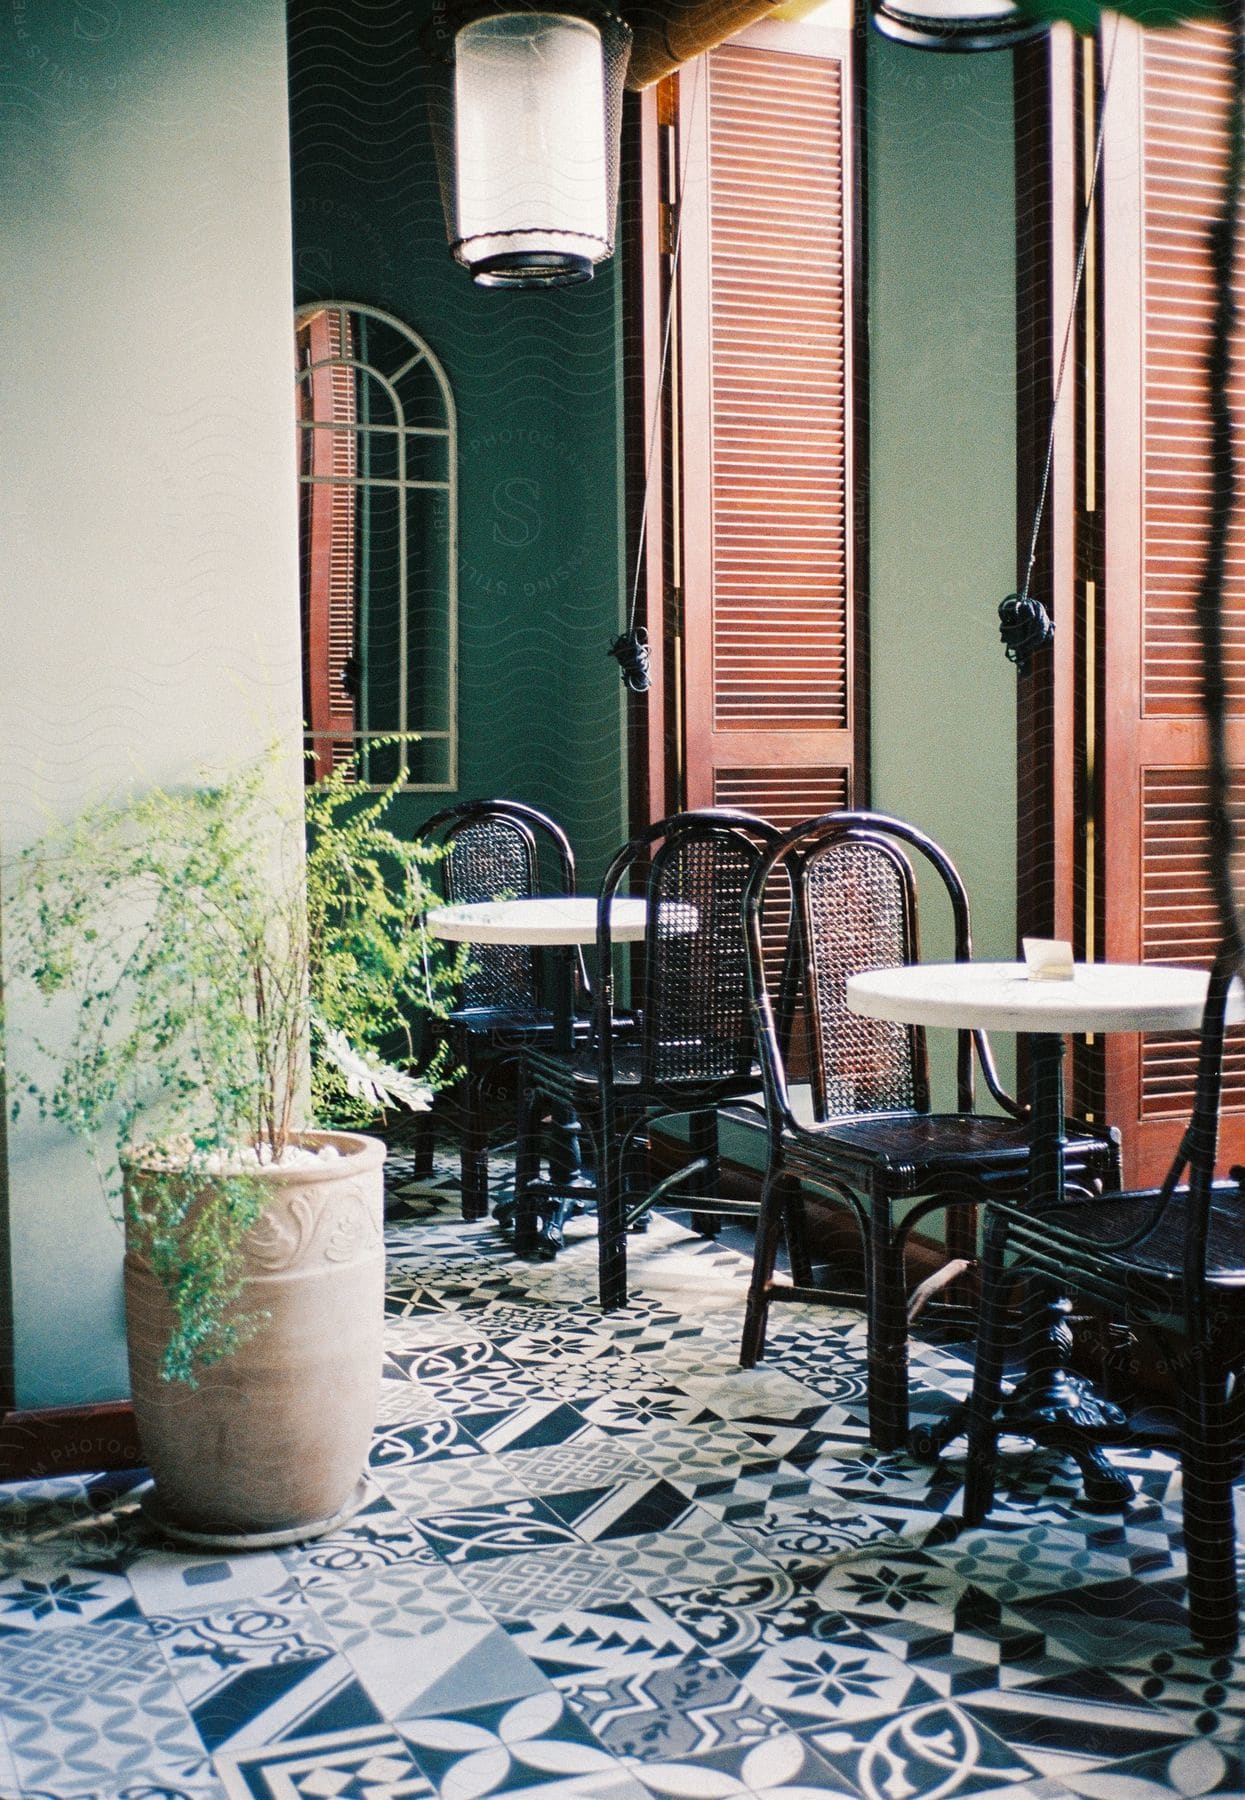 Restaurant interior with white tables black chairs potted plant mosaic floor and open shutter windows